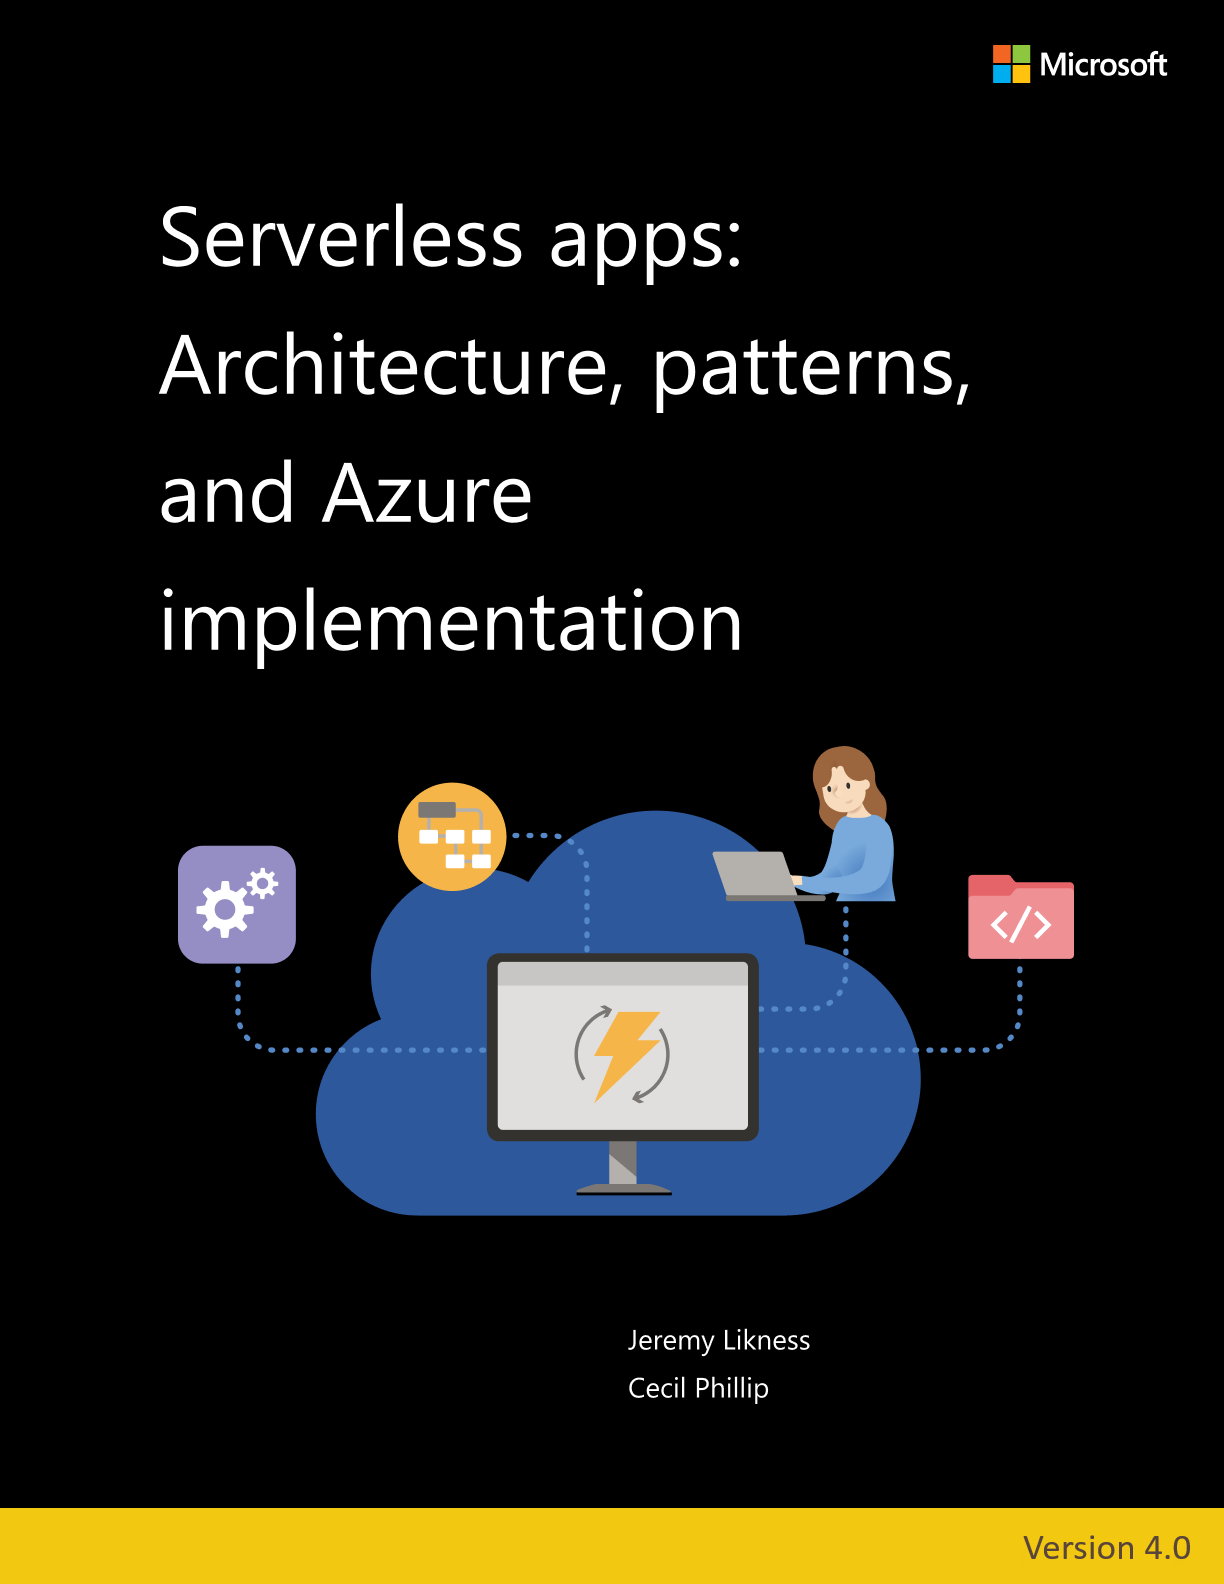 Screenshot that shows the Serverless Apps e-book cover.